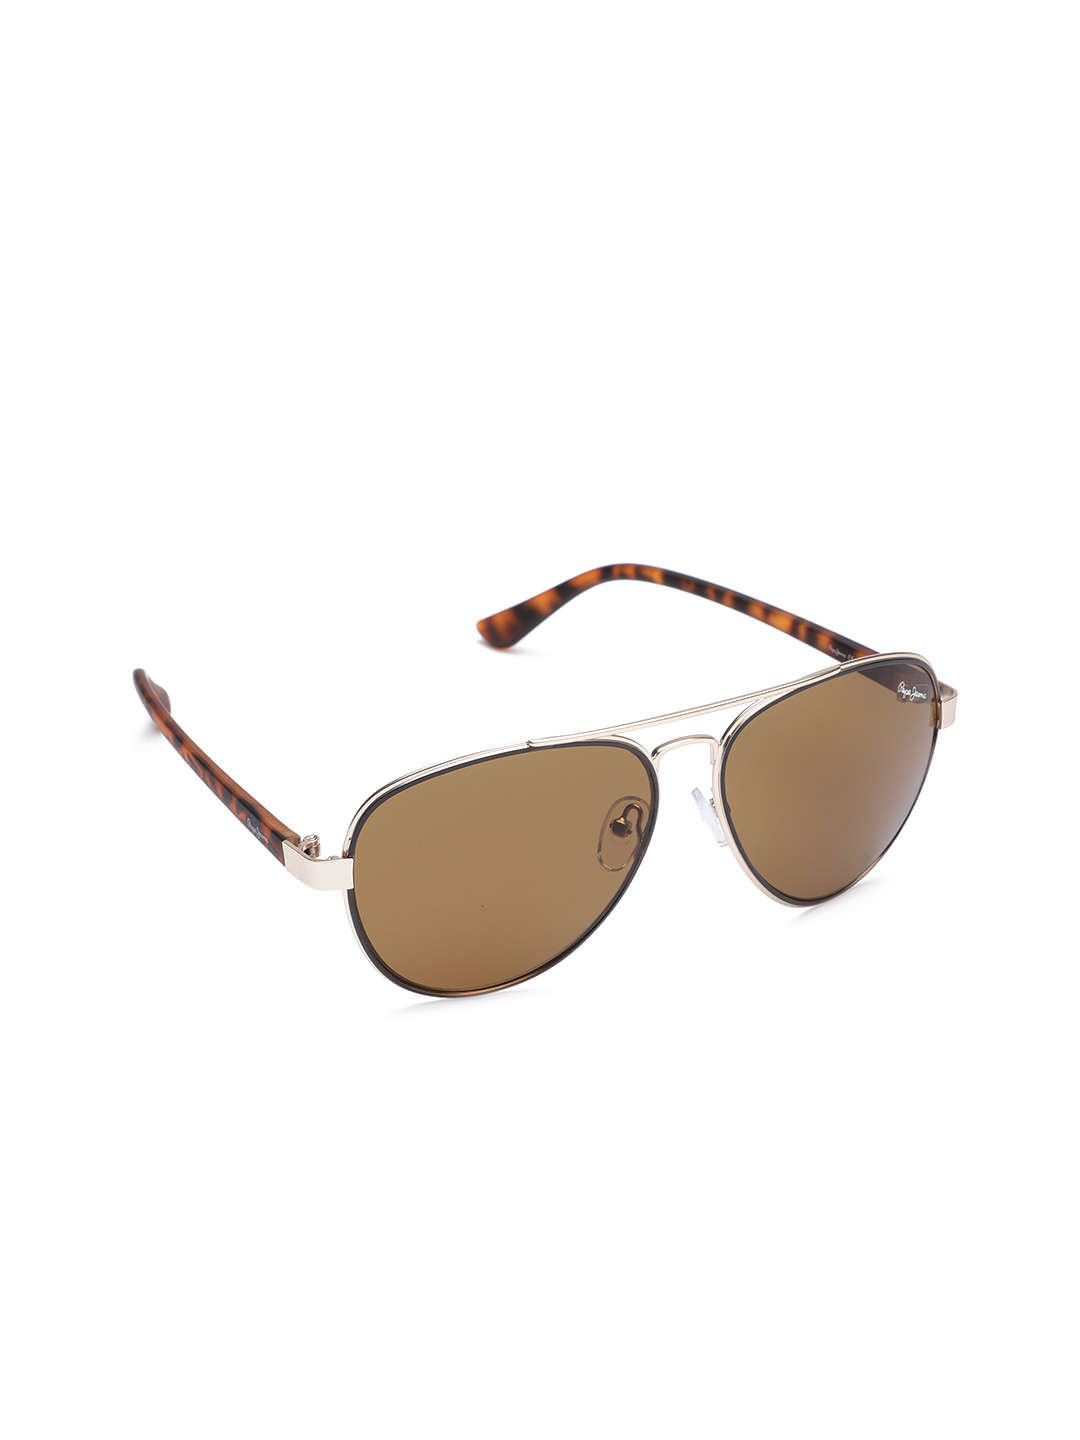 Sunglasses PEPE JEANS brown Women Accessories Pepe Jeans Women Sunglasses Pepe Jeans Women Sunglasses Pepe Jeans Women 